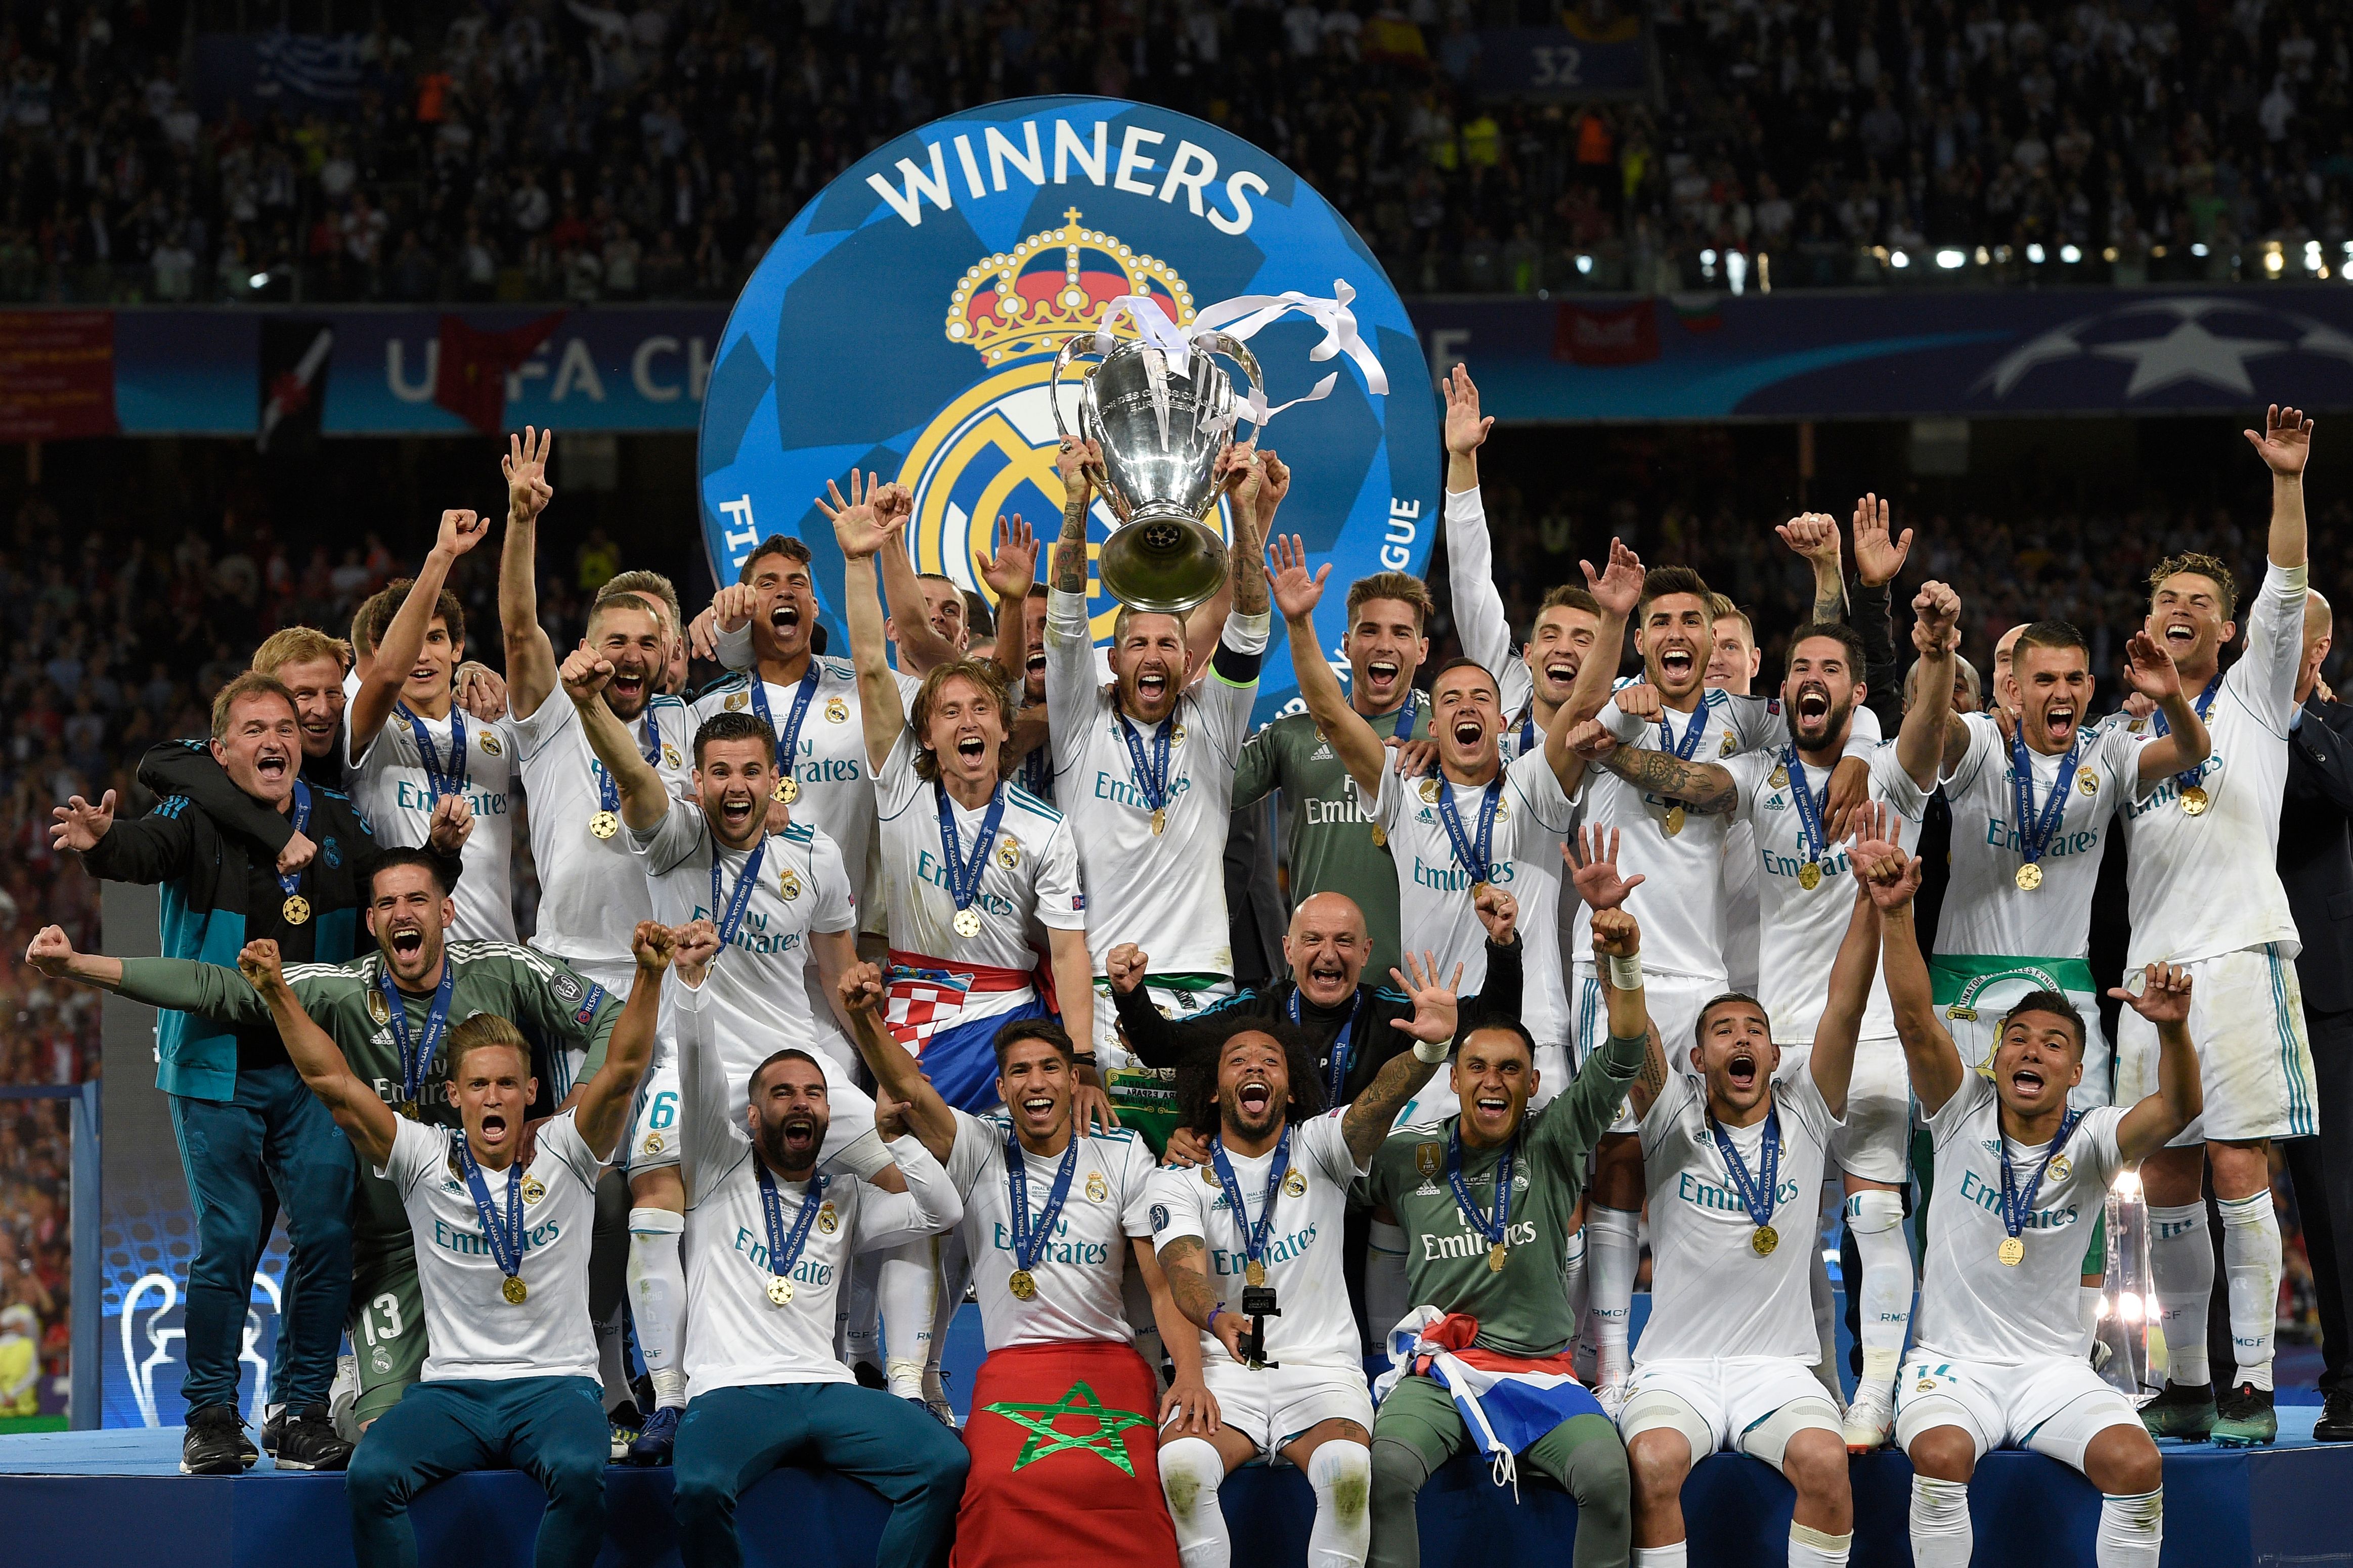 TOPSHOT - Real Madrid's Spanish defender Sergio Ramos (C) holds the trophy after winning the UEFA Champions League final football match between Liverpool and Real Madrid at the Olympic Stadium in Kiev, Ukraine on May 26, 2018. - Real Madrid defeated Liverpool 3-1. (Photo by LLUIS GENE / AFP)        (Photo credit should read LLUIS GENE/AFP via Getty Images)